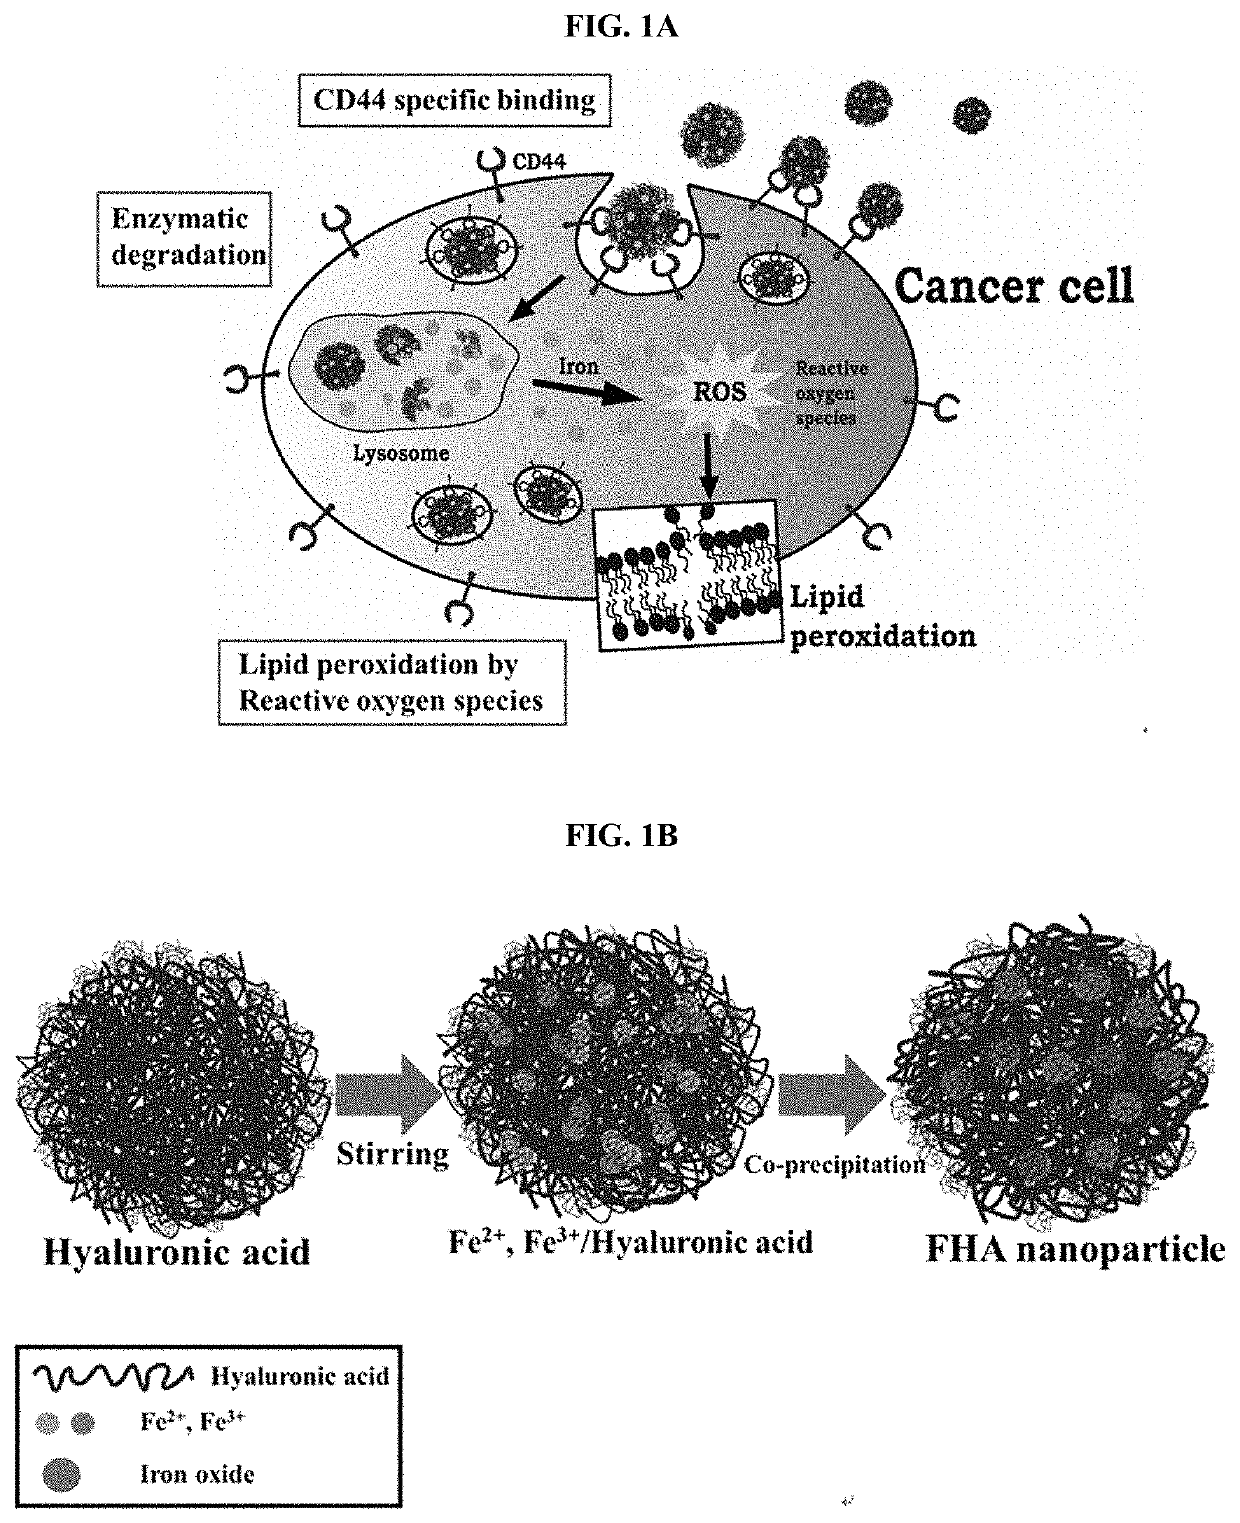 Nanoparticles for selective death of cancer cells through ferroptosis, method of preparing the same, and use of the nanoparticles